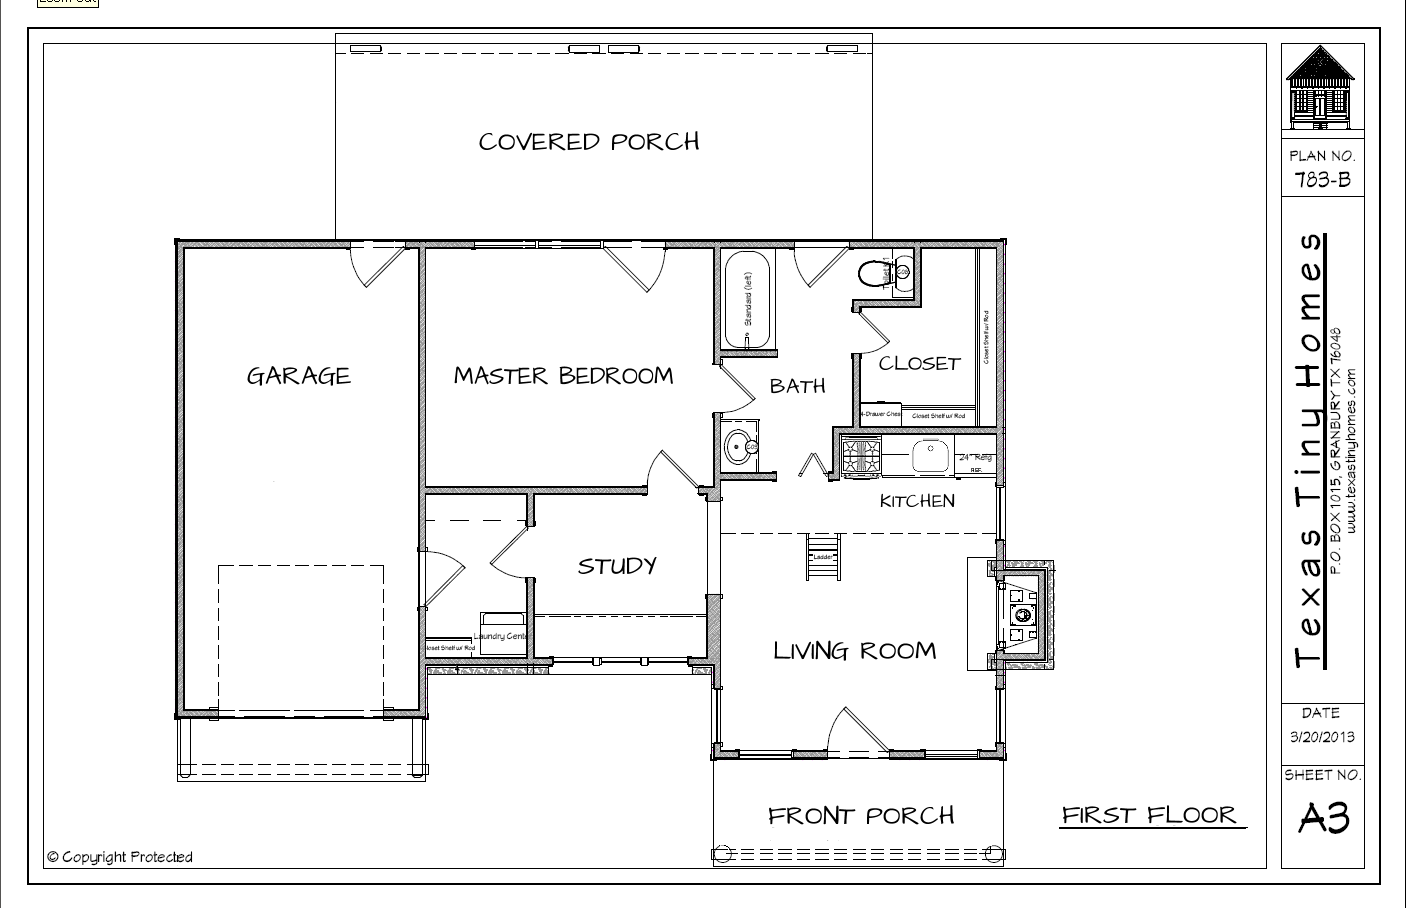 Tiny House Plans, Small House Plans, Little House Plans, Micro House Plans, Tiny Homes, Small Homes, Little Homes, Micro Homes, Tiny Homes, Tiny Homes Builders, Small Homes Builders, Little Homes Builders, Micro Homes Builders